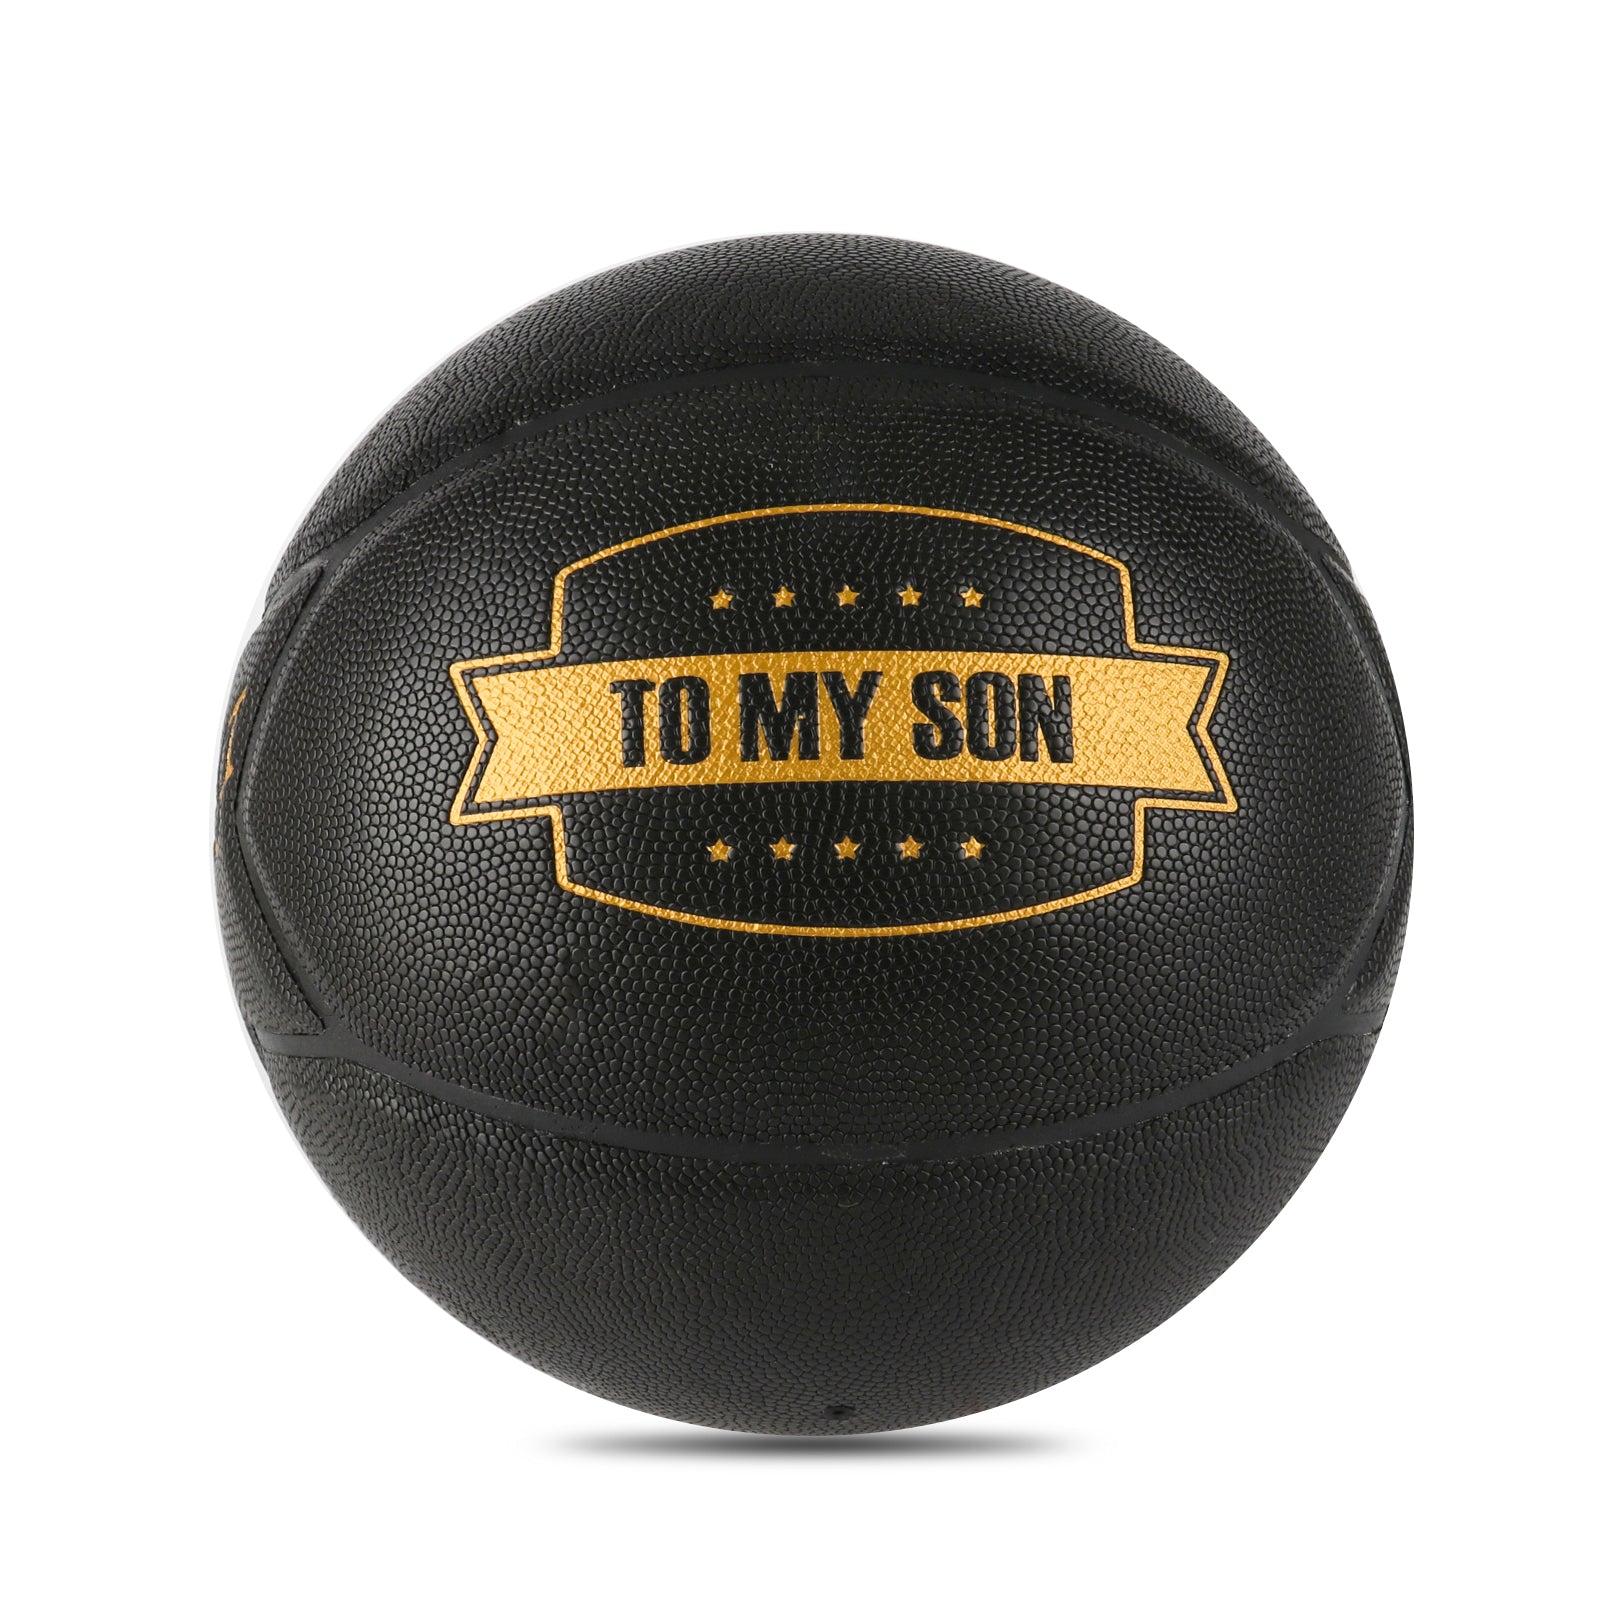 Personalized Letter Basketball For Son, Basketball Indoor/Outdoor Game Ball For Boy, Birthday Christmas Gift For Son, Black